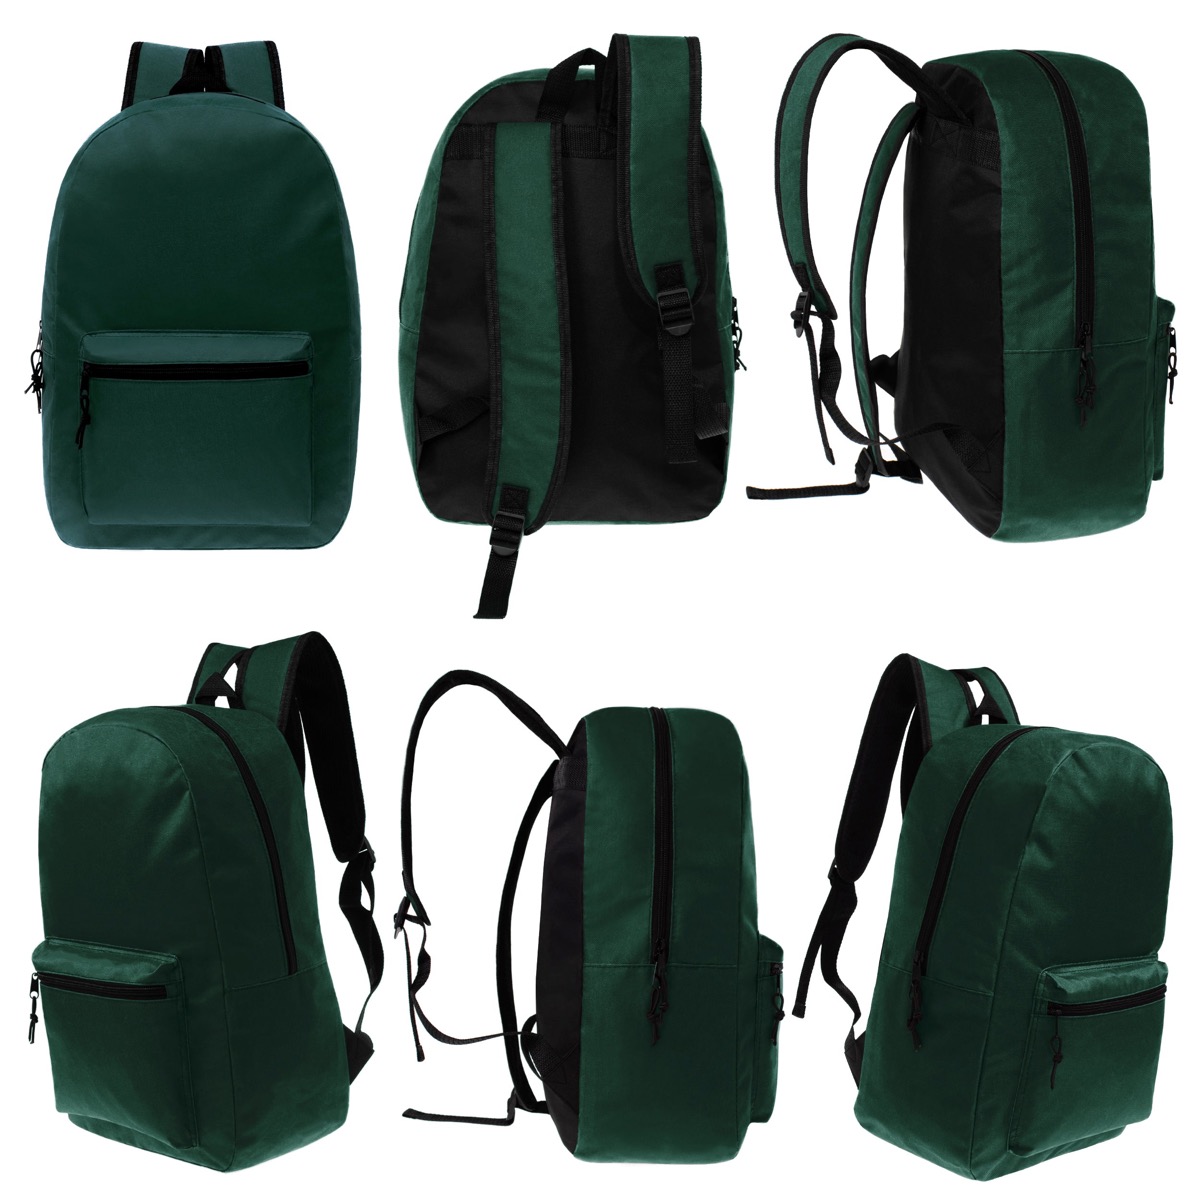 ''17'''' Lightweight Classic Style BACKPACKs w/ Adjustable Paded Straps - Dark Green''